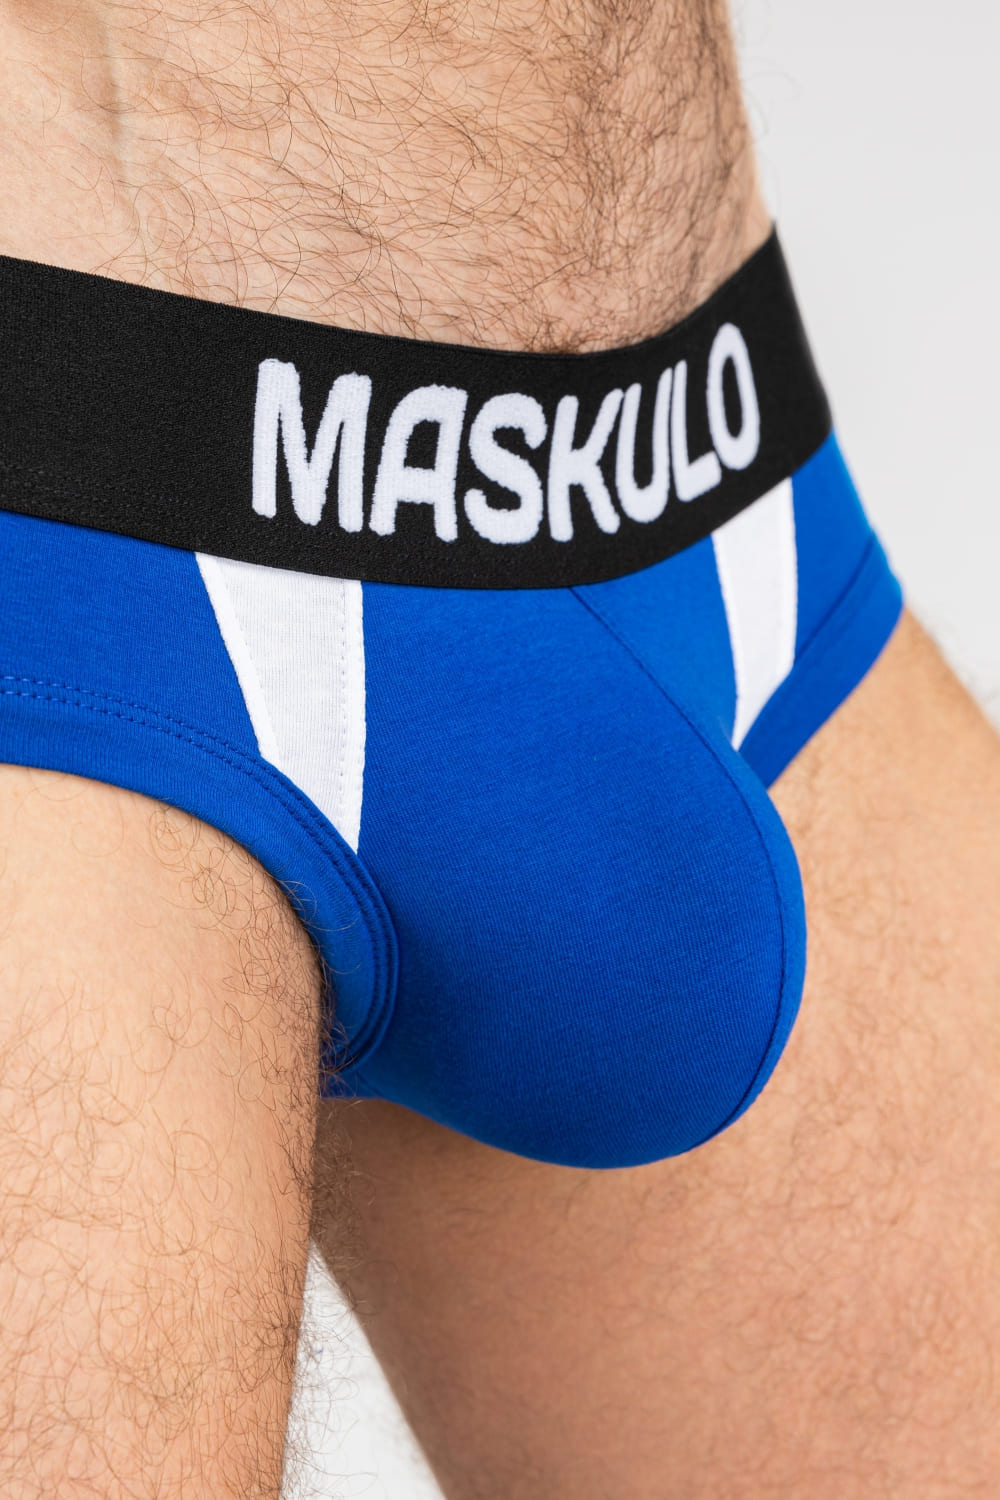 CAPTAIN-A Briefs with O-Inside-POUCH. Blue 'Royal'+White